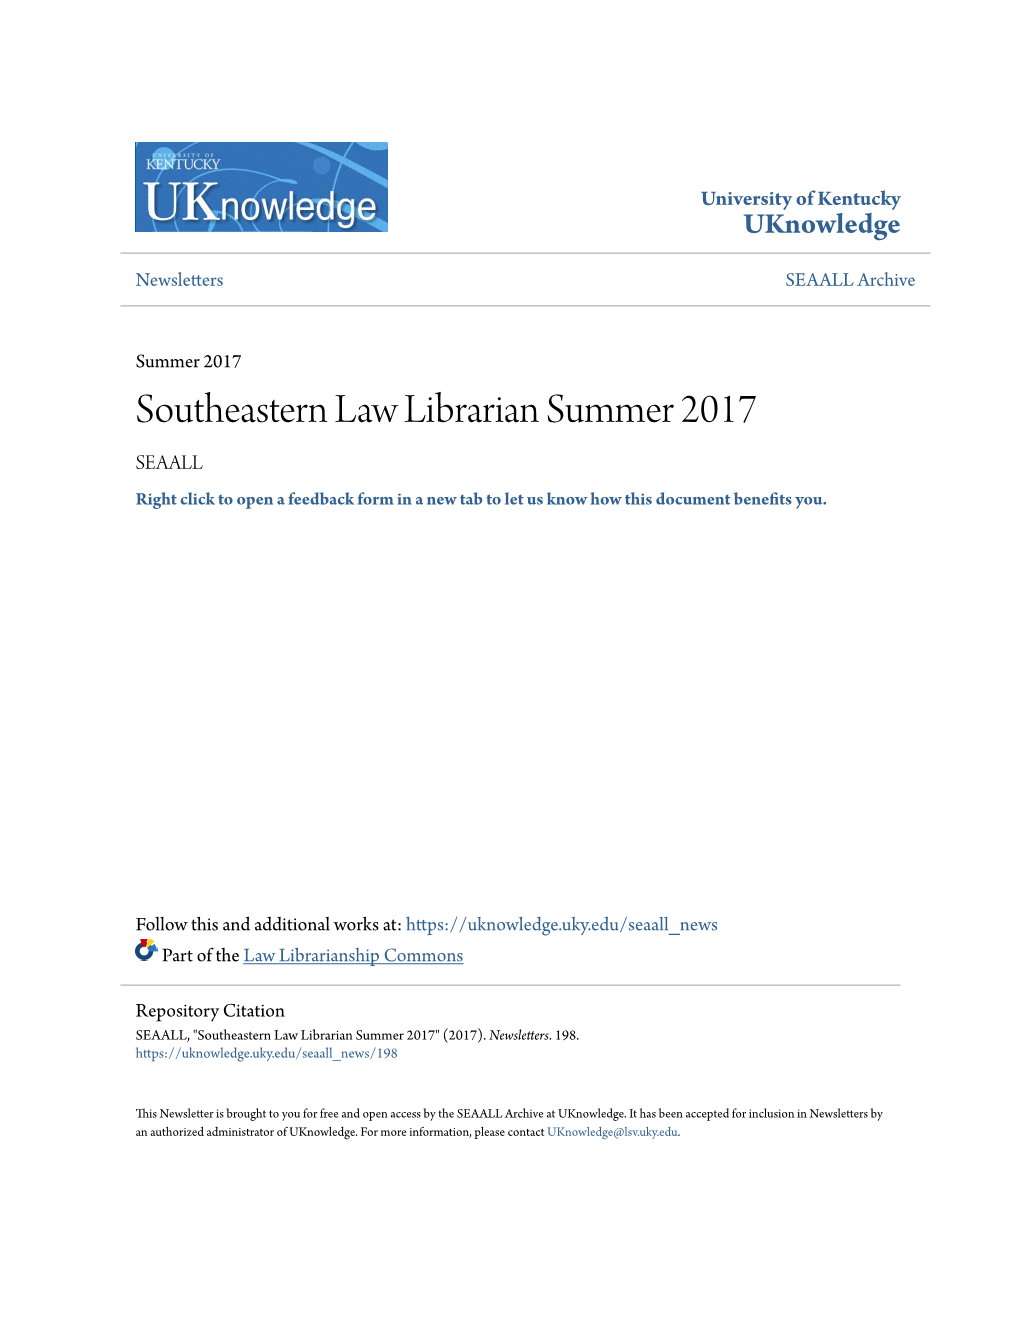 Southeastern Law Librarian Summer 2017 SEAALL Right Click to Open a Feedback Form in a New Tab to Let Us Know How This Document Benefits Oy U